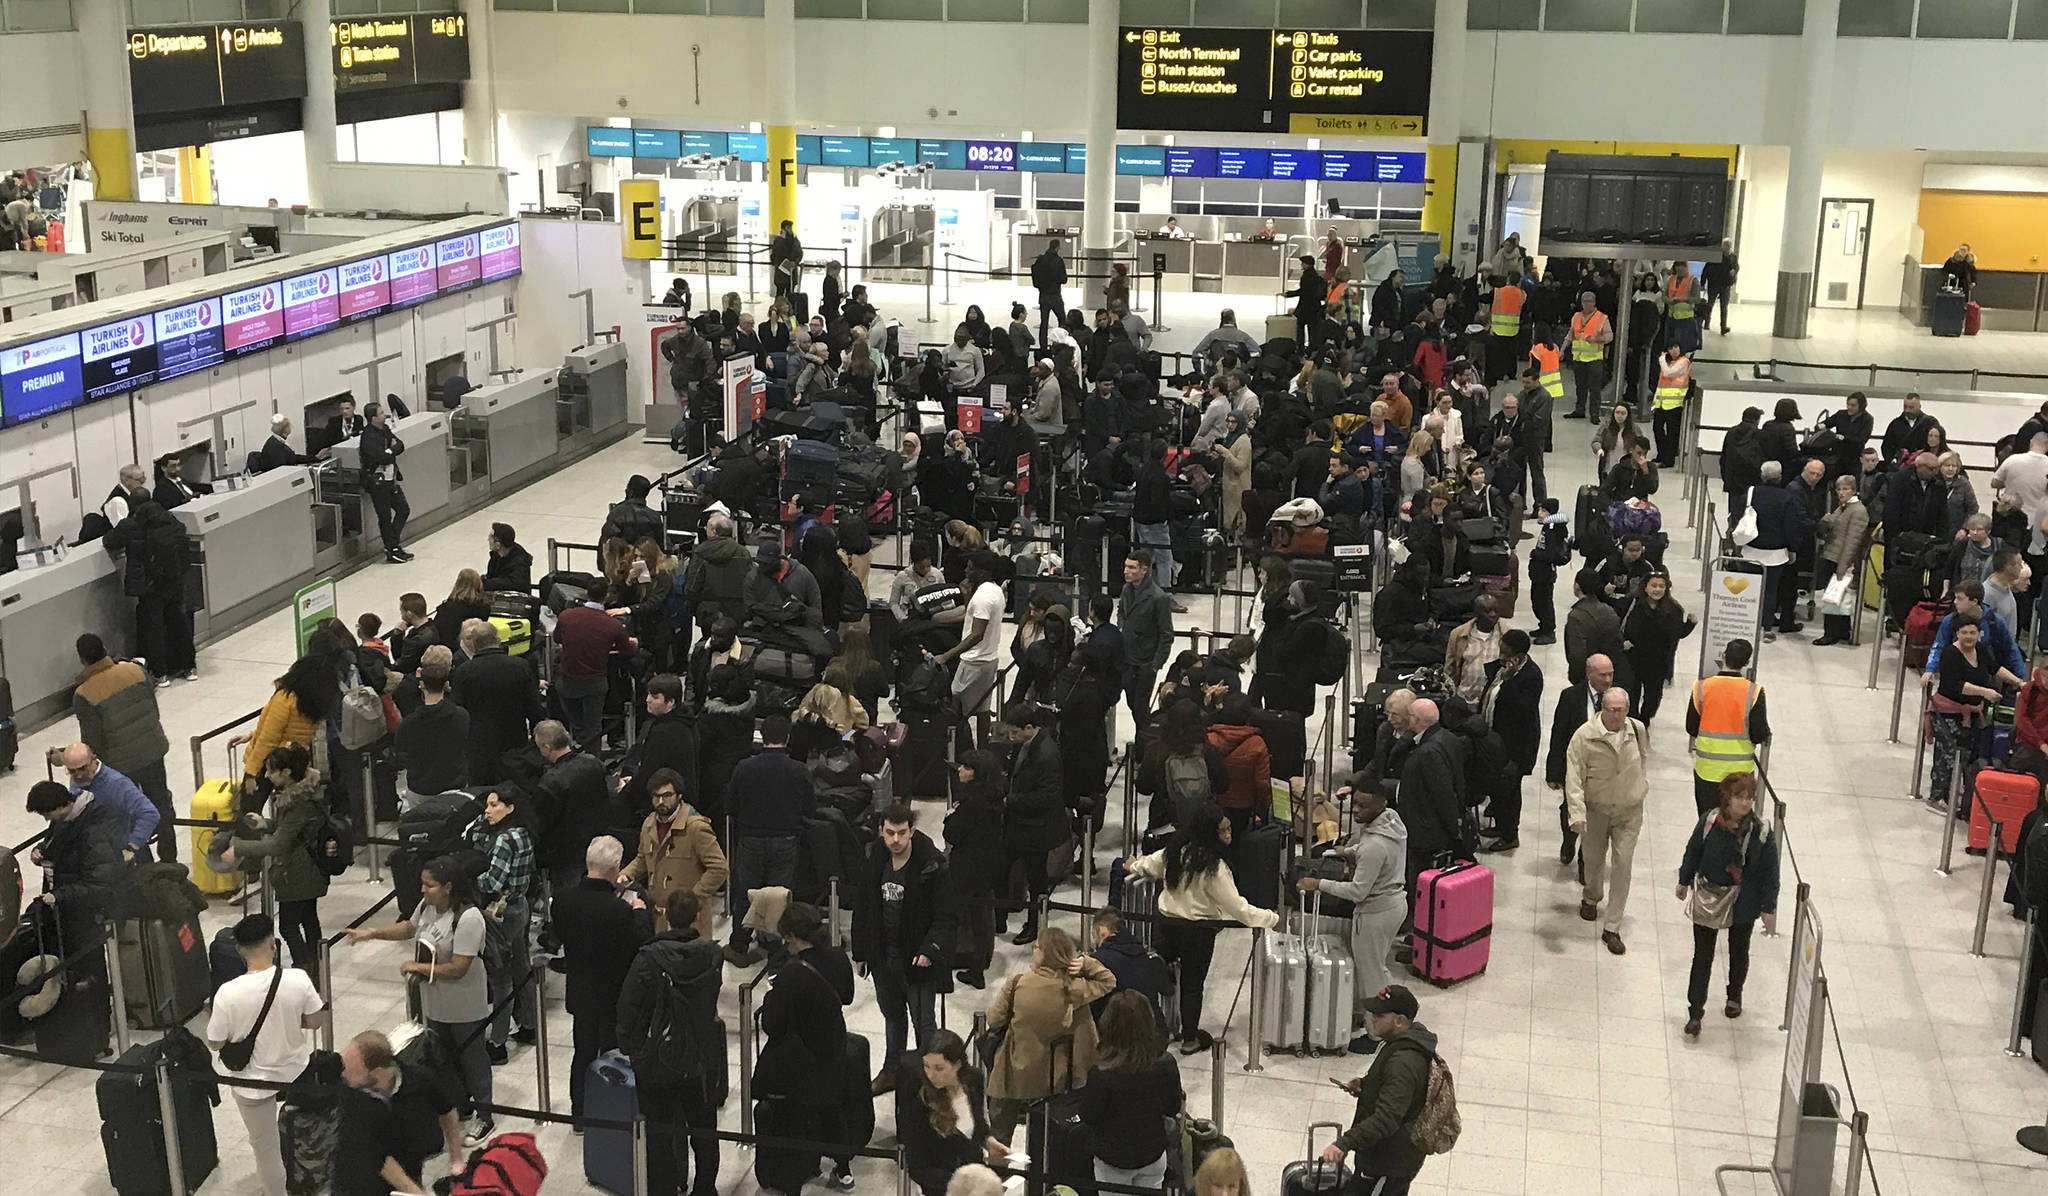 Passengers wait to check in at Gatwick Airport in England, Friday, Dec. 21, 2018. Flights resumed at London’s Gatwick Airport on Friday morning after drones sparked the shutdown of the airfield for more than 24 hours, leaving tens of thousands of passengers stranded or delayed during the busy holiday season. (AP Photo/Kirsty Wigglesworth)